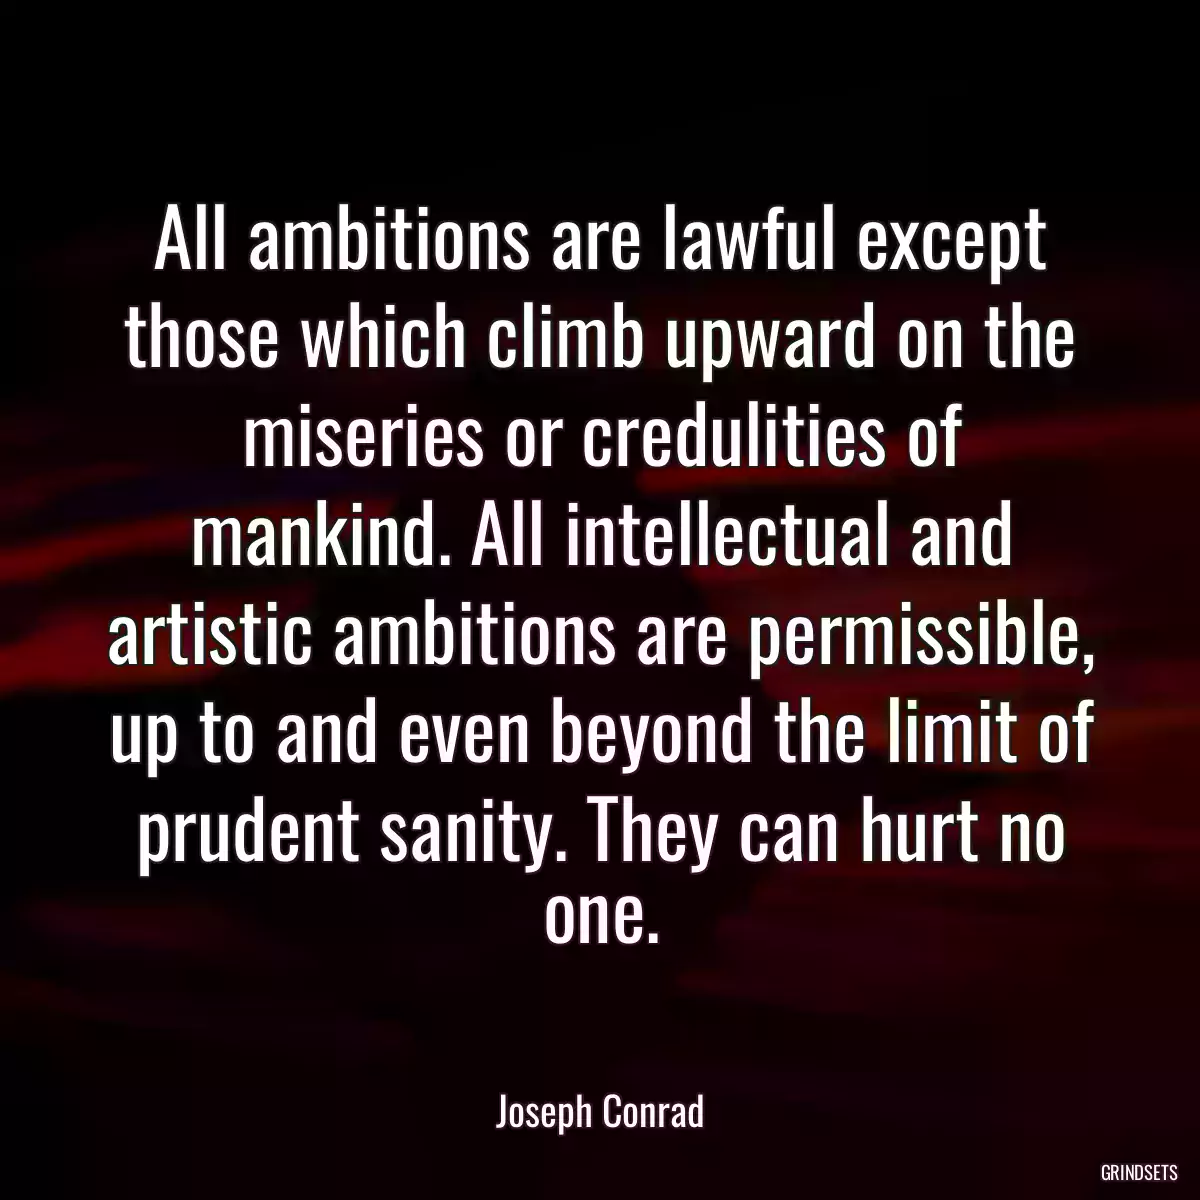 All ambitions are lawful except those which climb upward on the miseries or credulities of mankind. All intellectual and artistic ambitions are permissible, up to and even beyond the limit of prudent sanity. They can hurt no one.